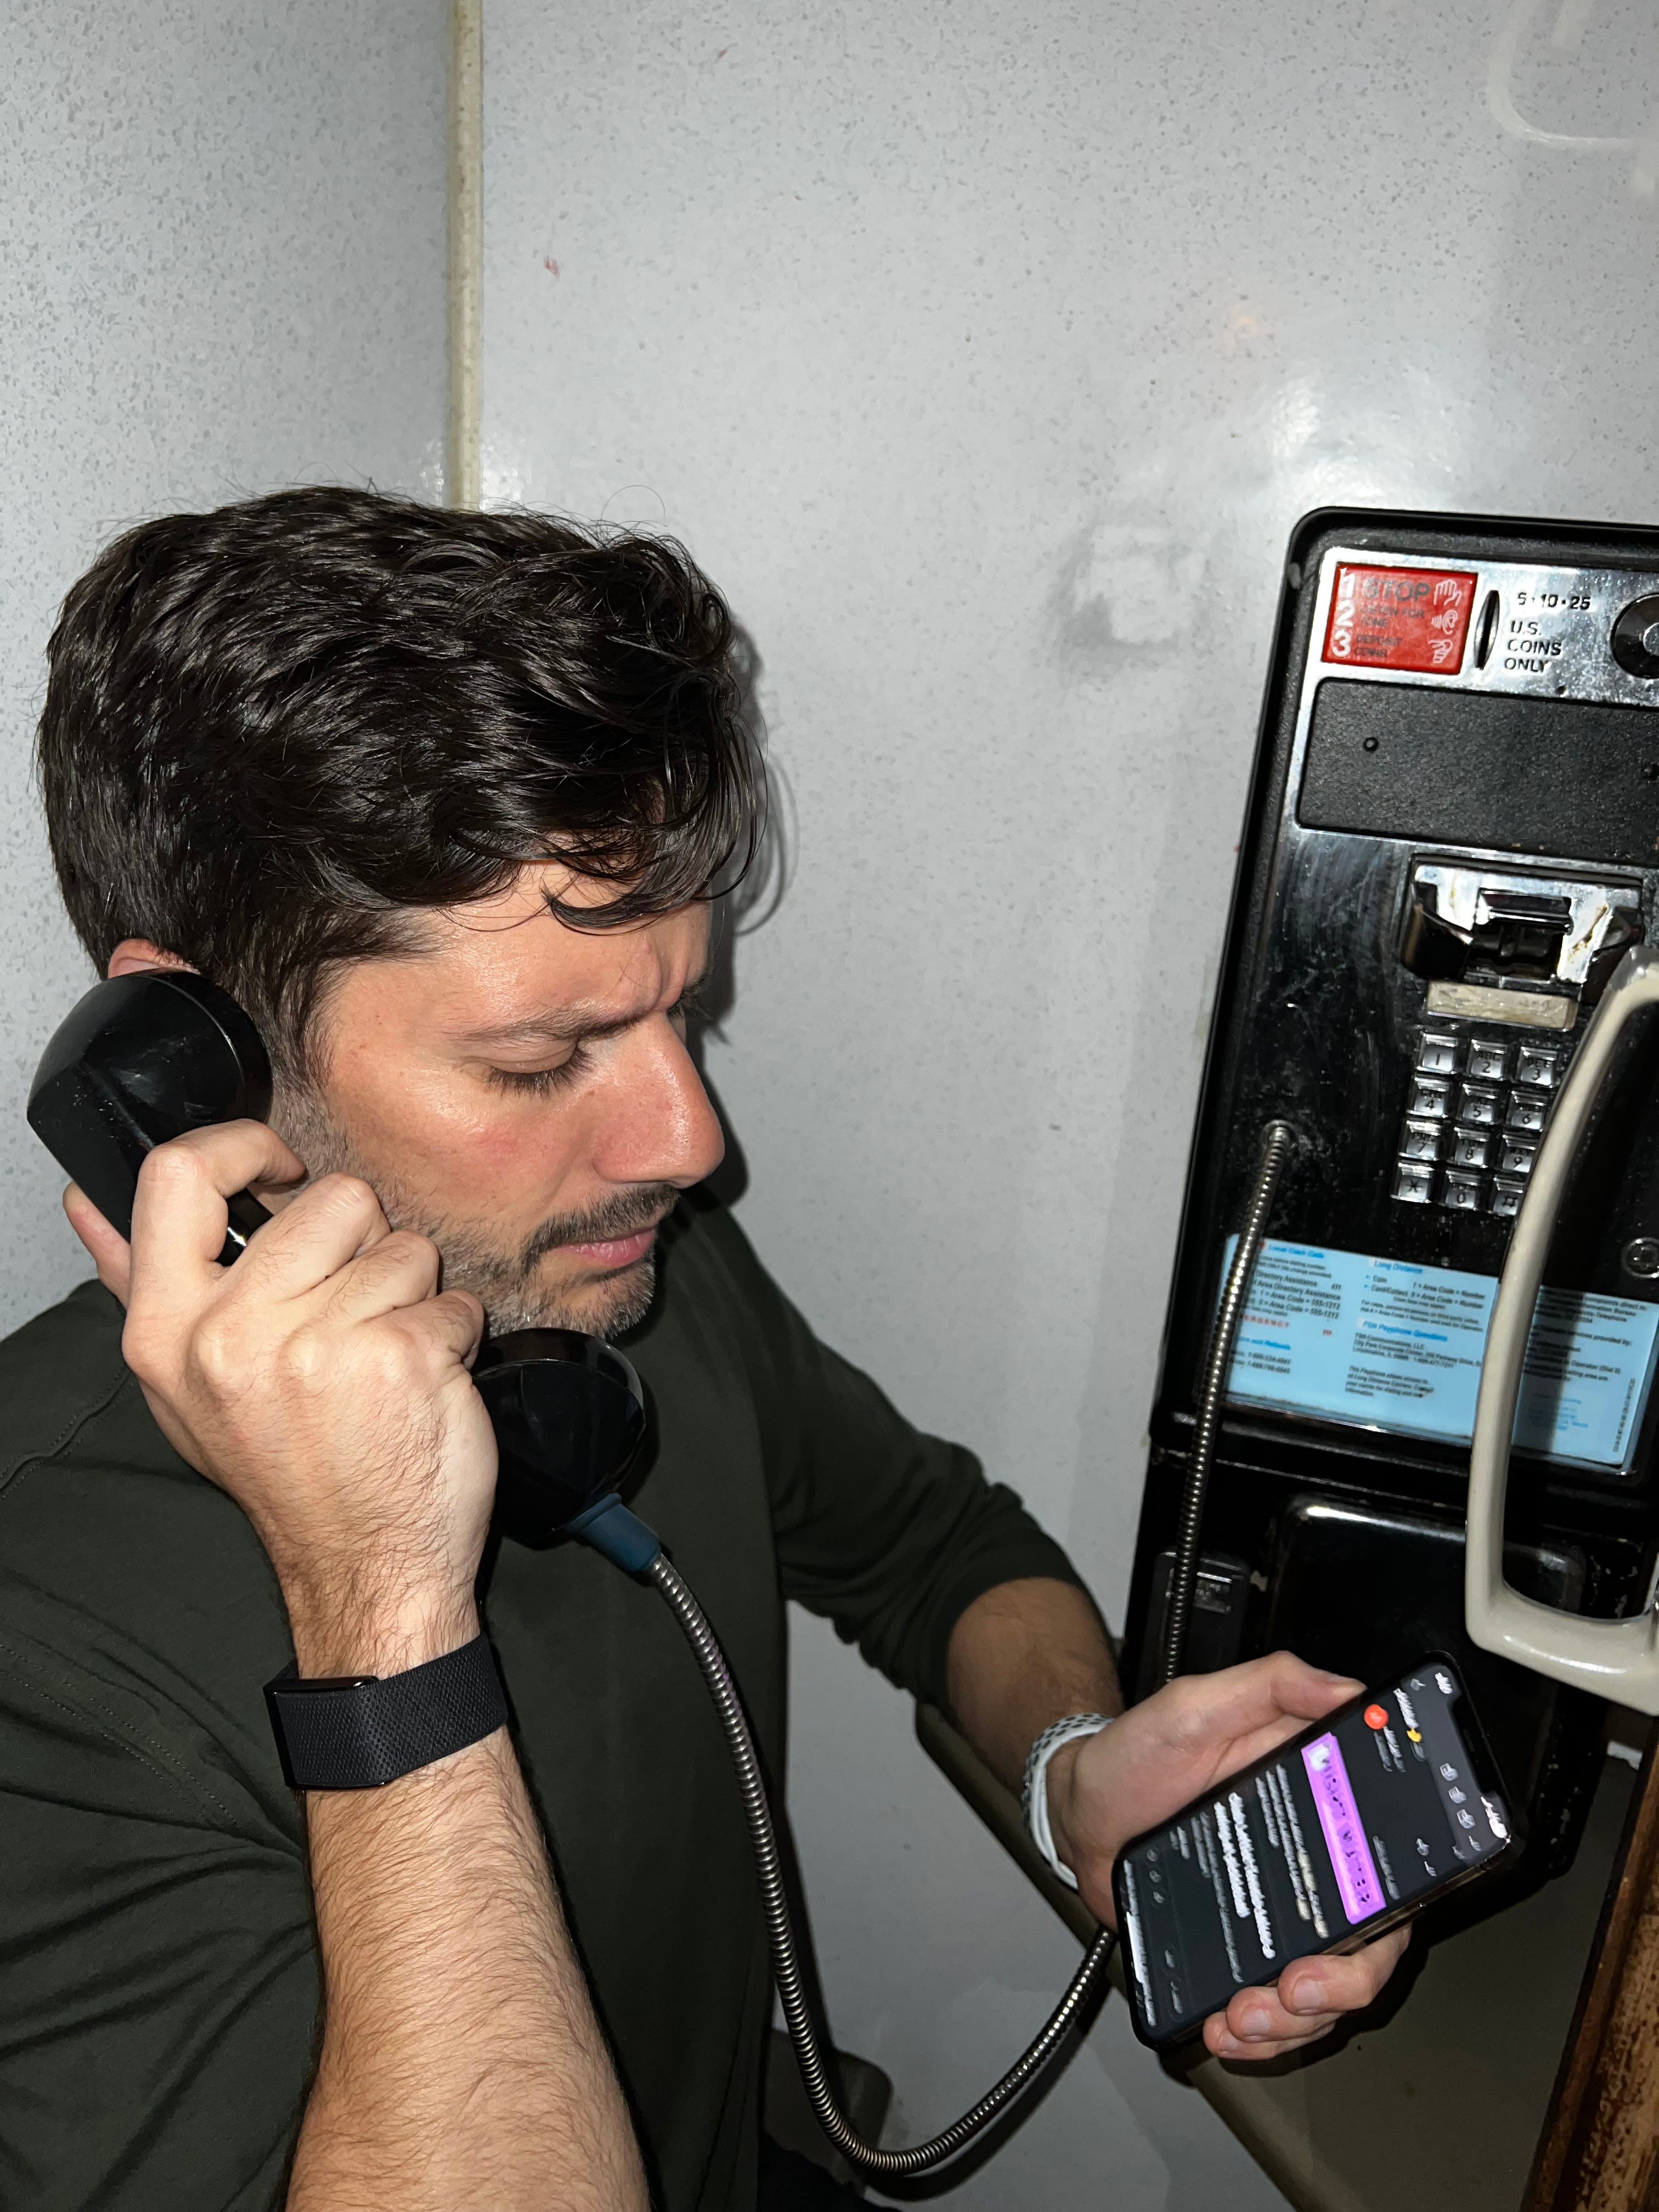 Sami talks on a public phone while holding a phone open to Night Water.